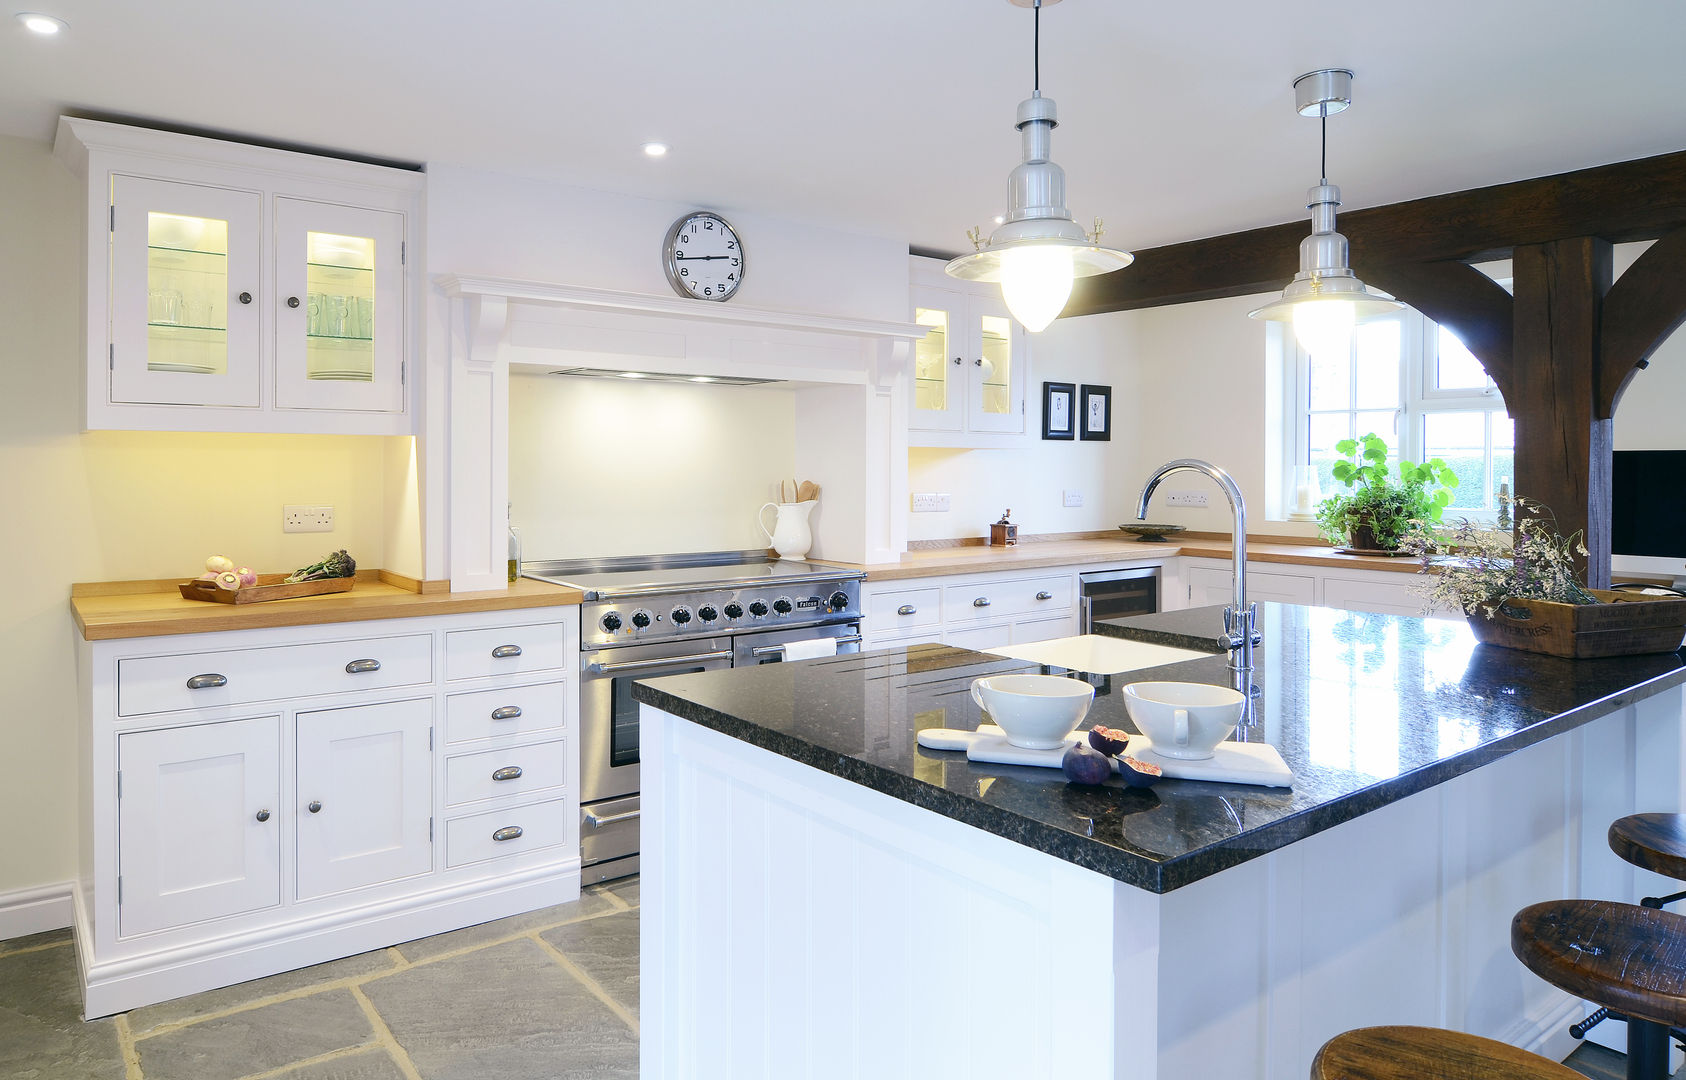 Our Classic Range kitchen in a Sussex Barn Home homify Kitchen